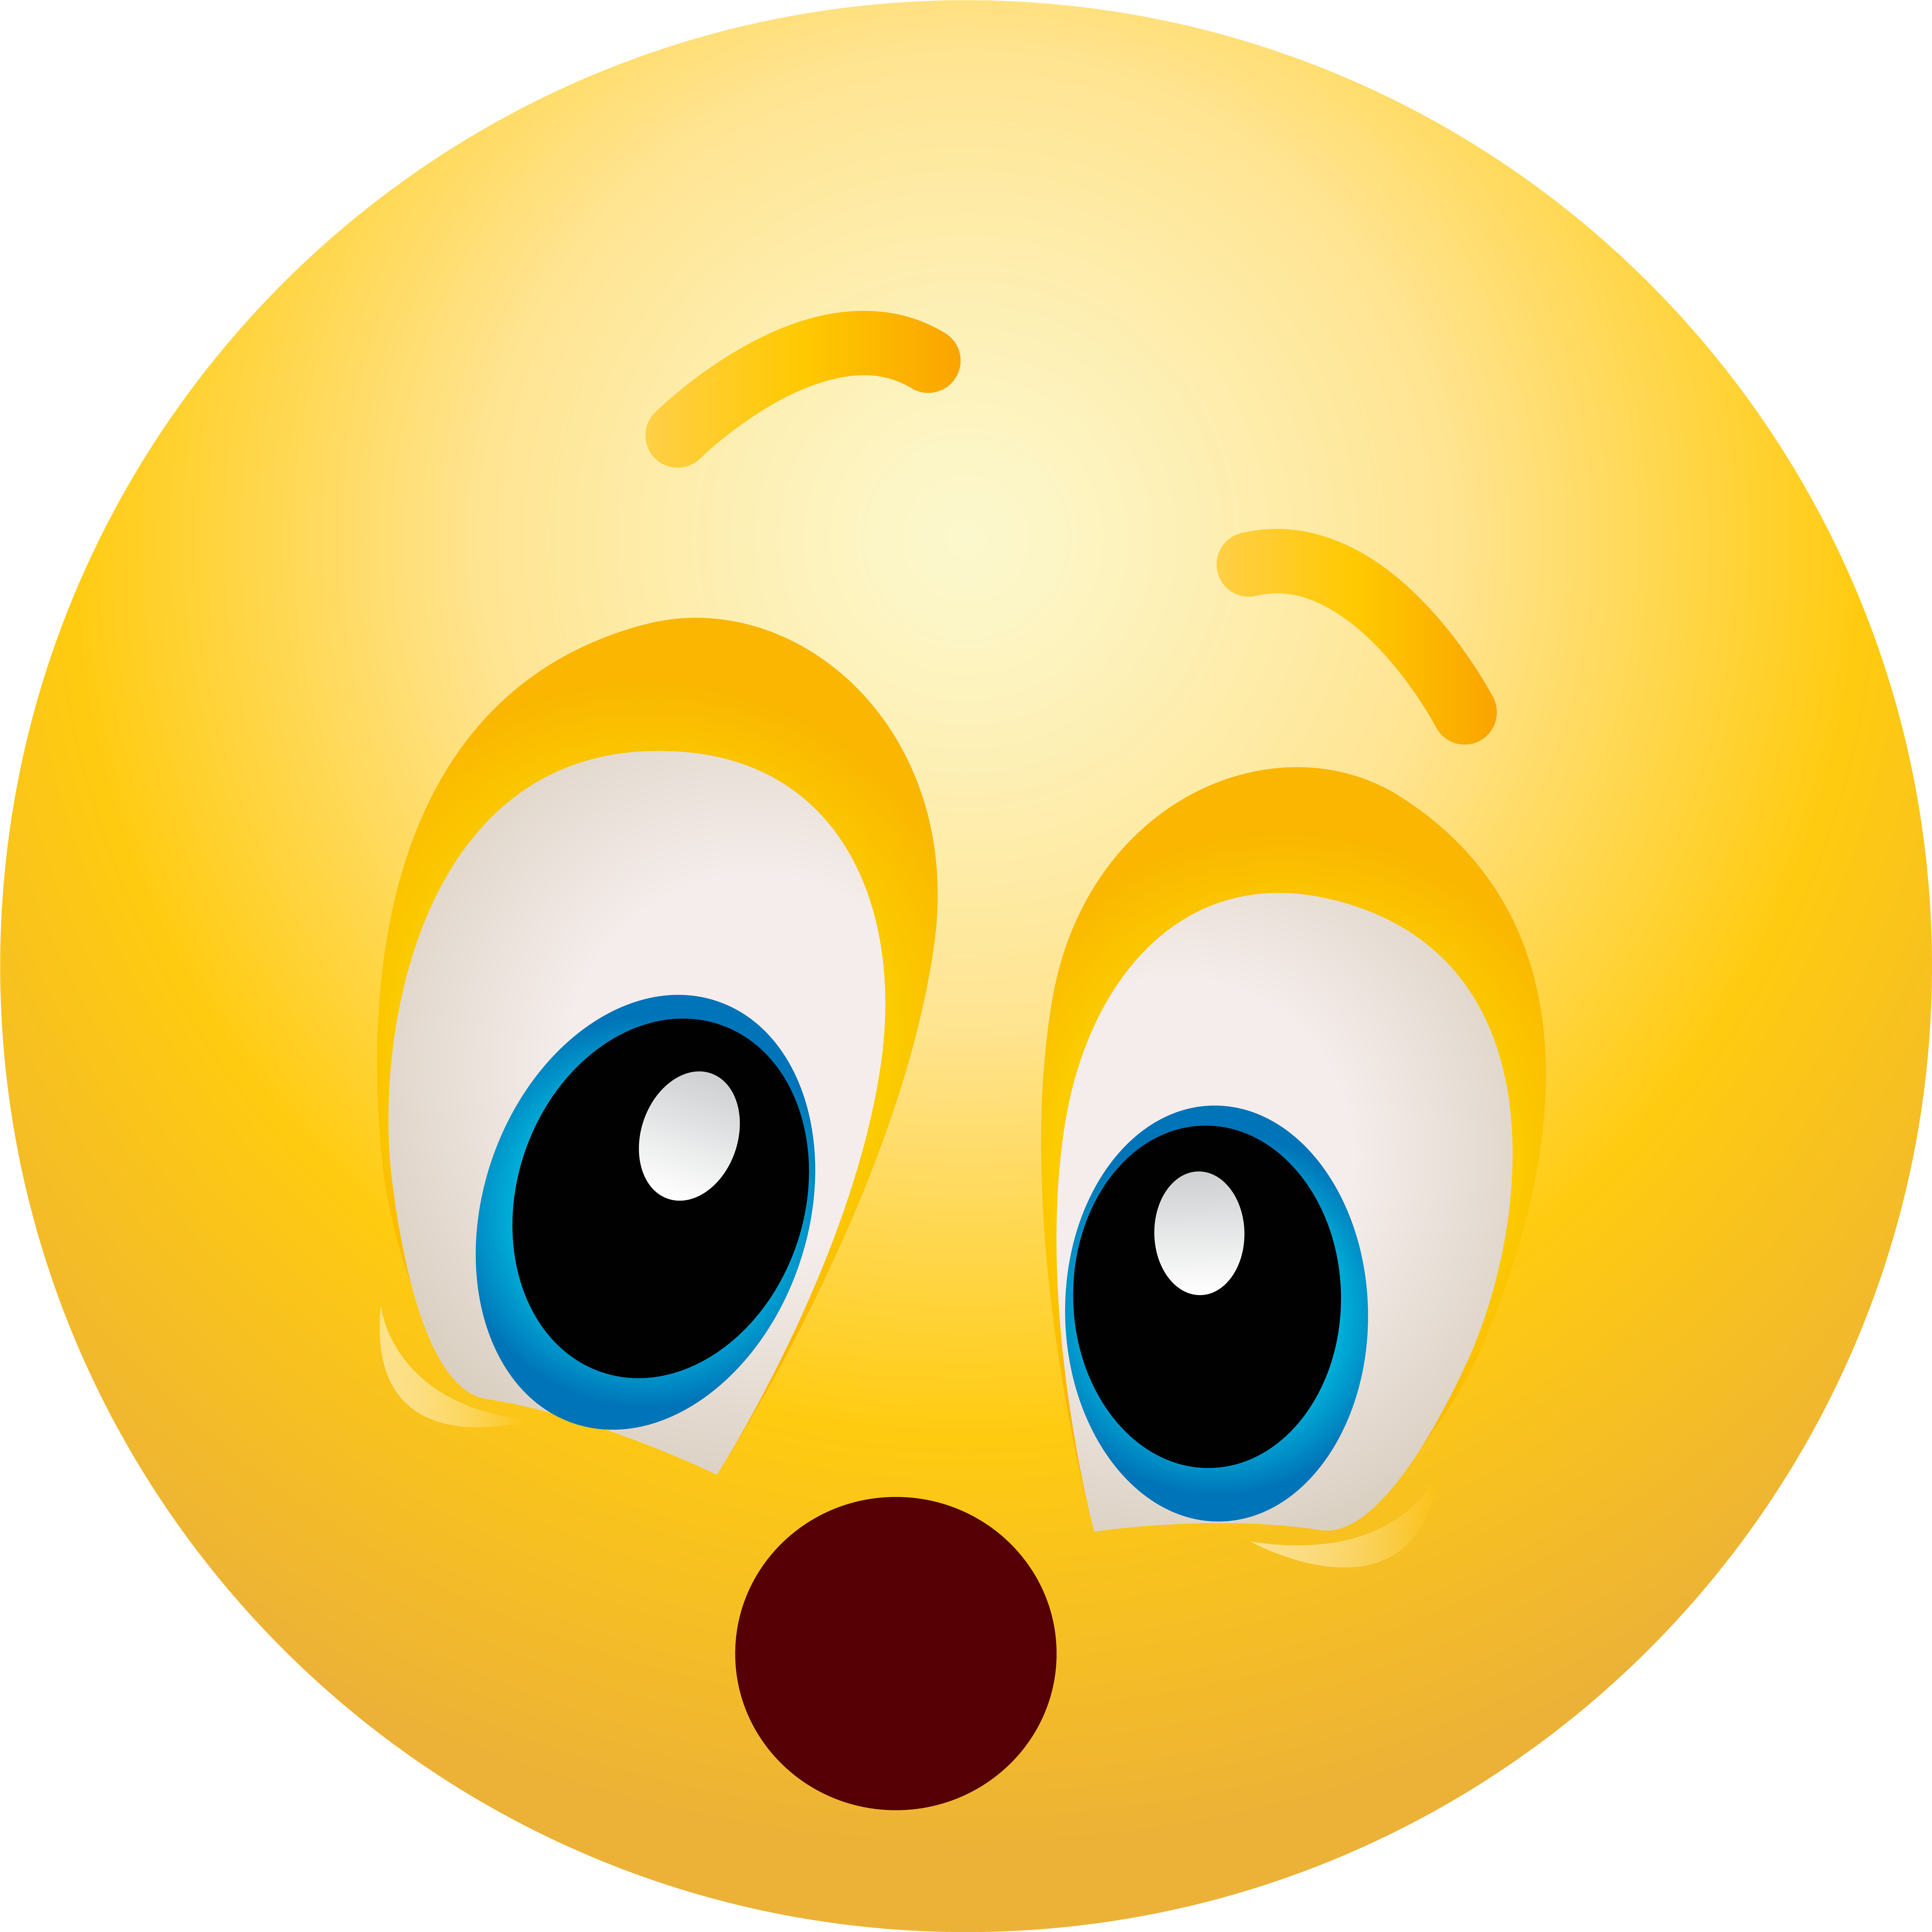 A Yellow Emoji With Blue Eyes And A Surprised Expression